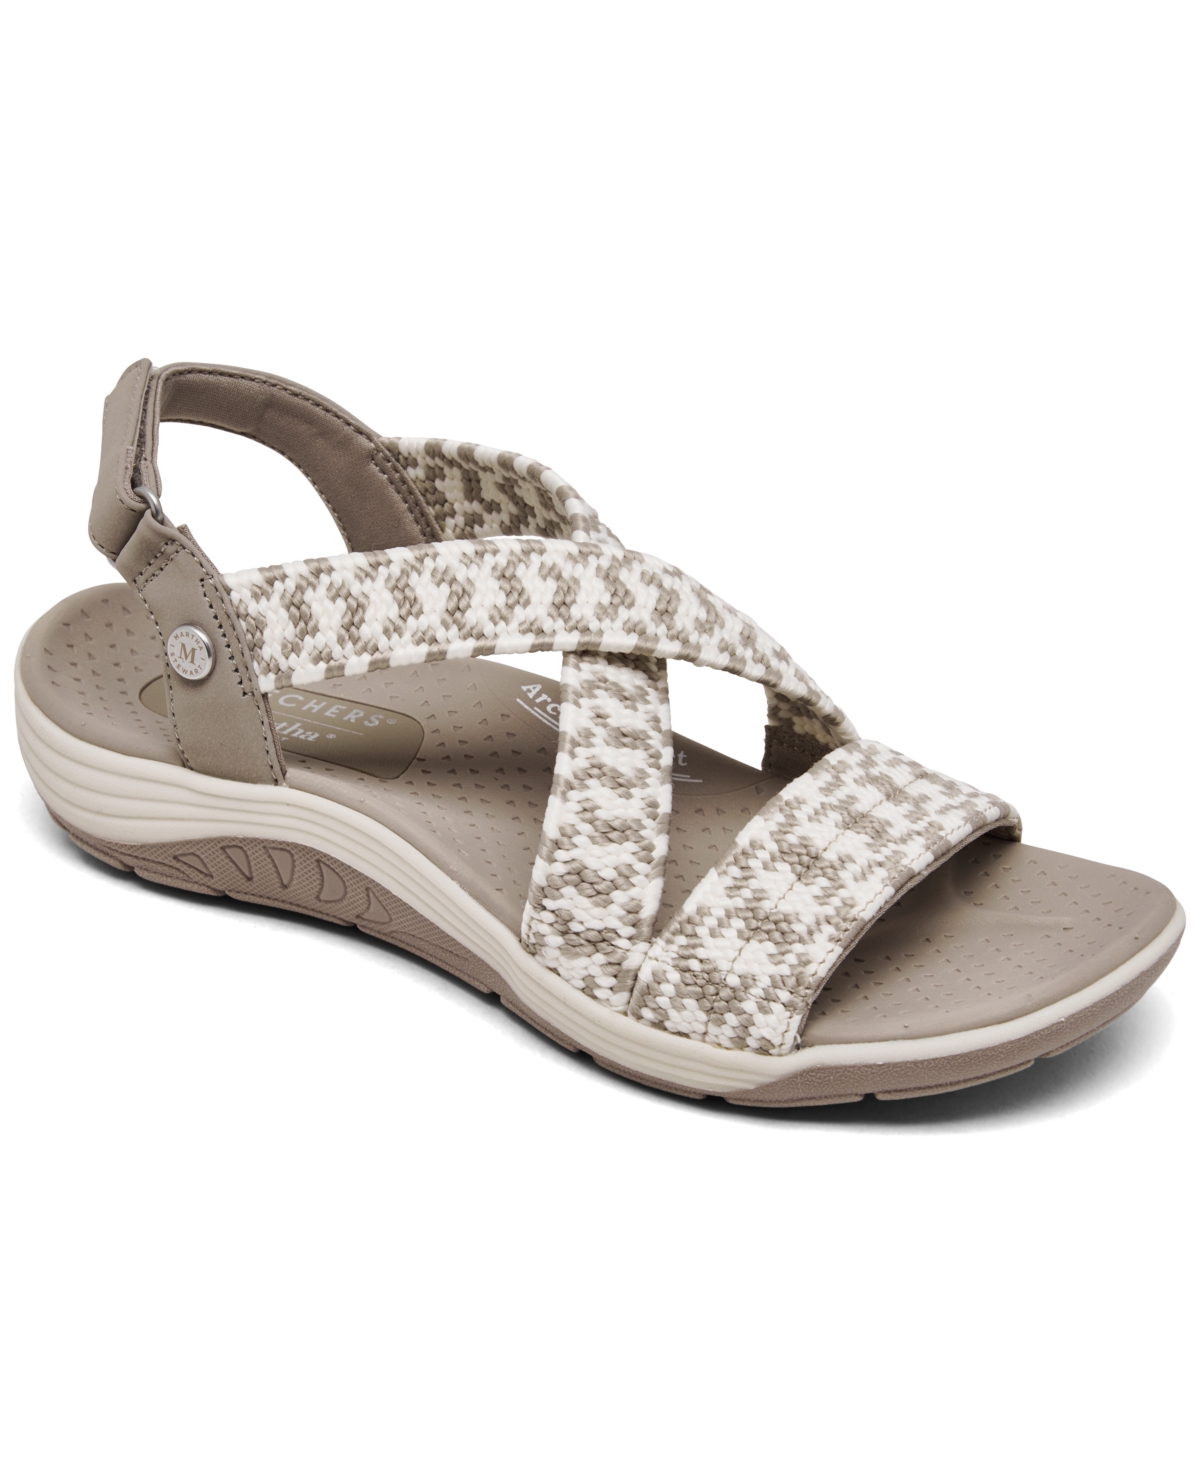 Women's Martha Stewart Reggae Cup - Coastal Trails Athletic Sandals from Finish Line - Taupe, Natural